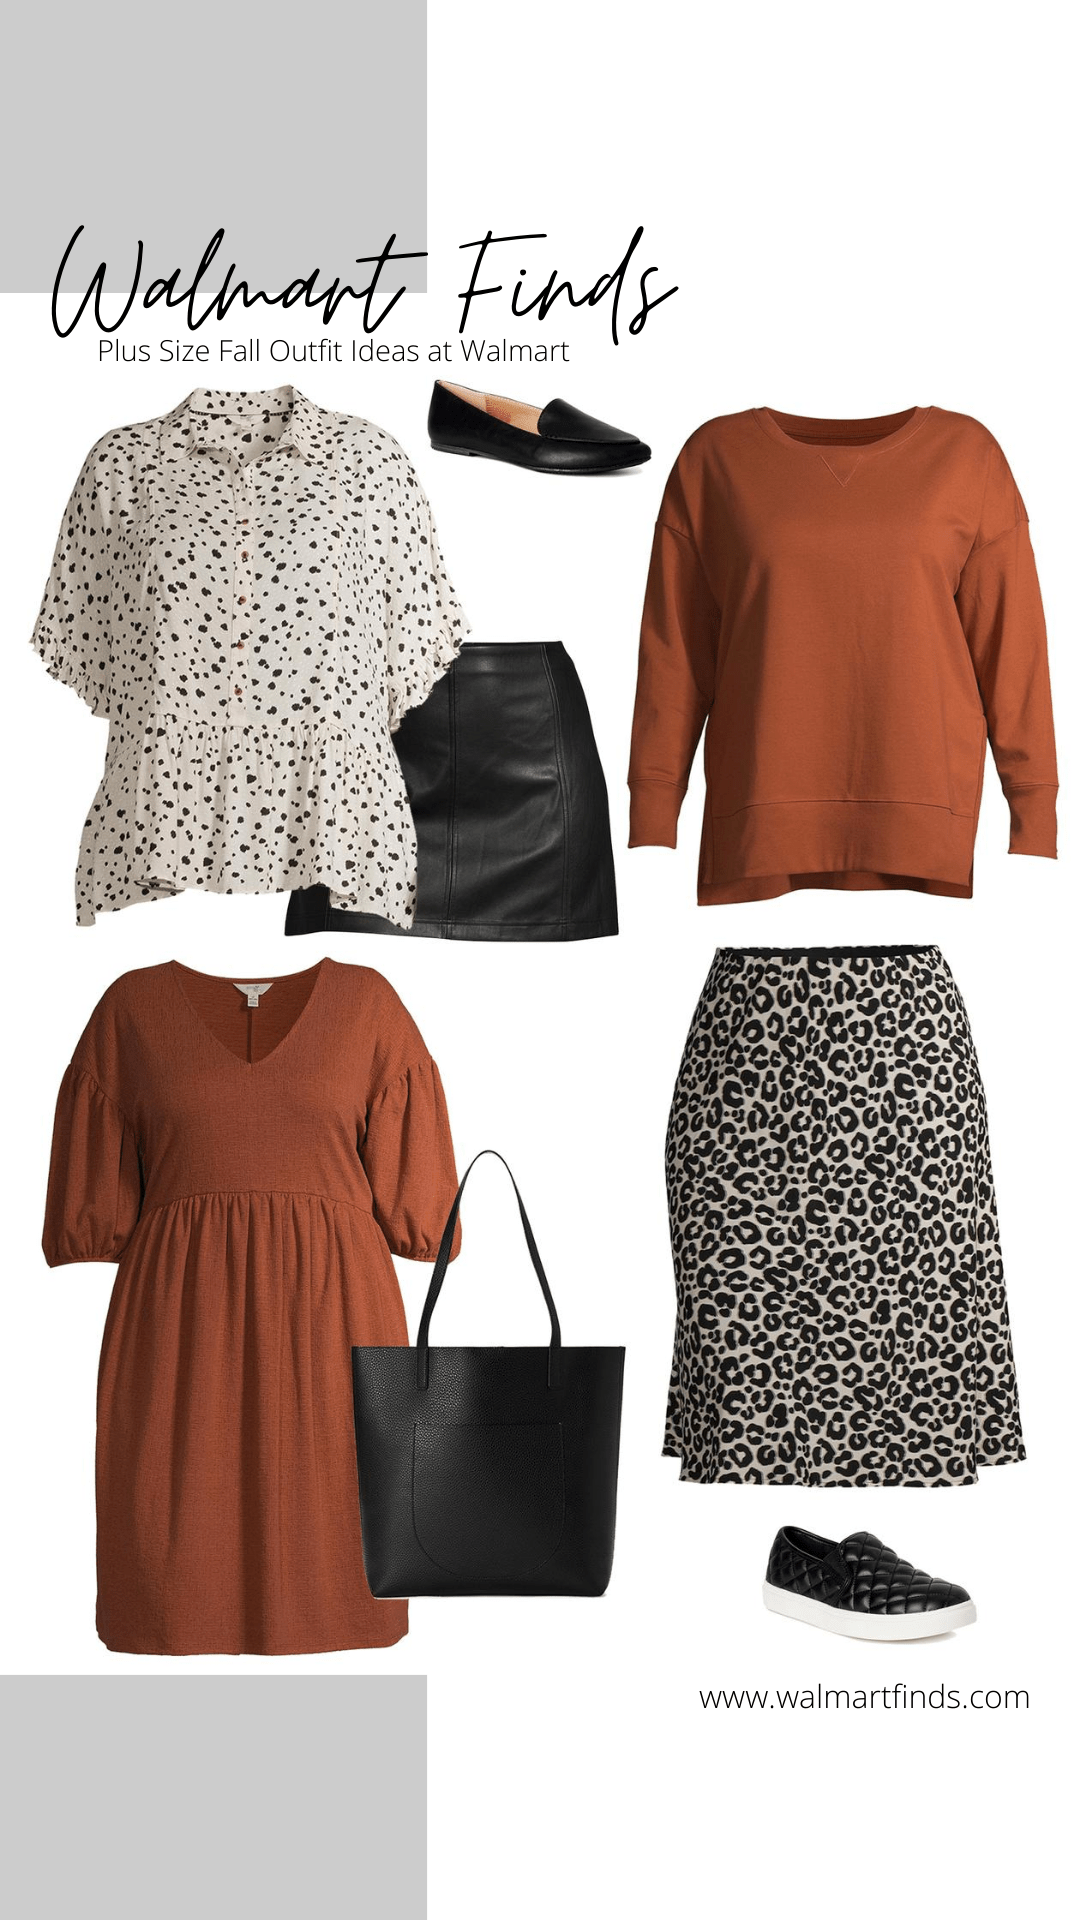 Plus Size Fall Outfit Ideas at Walmart